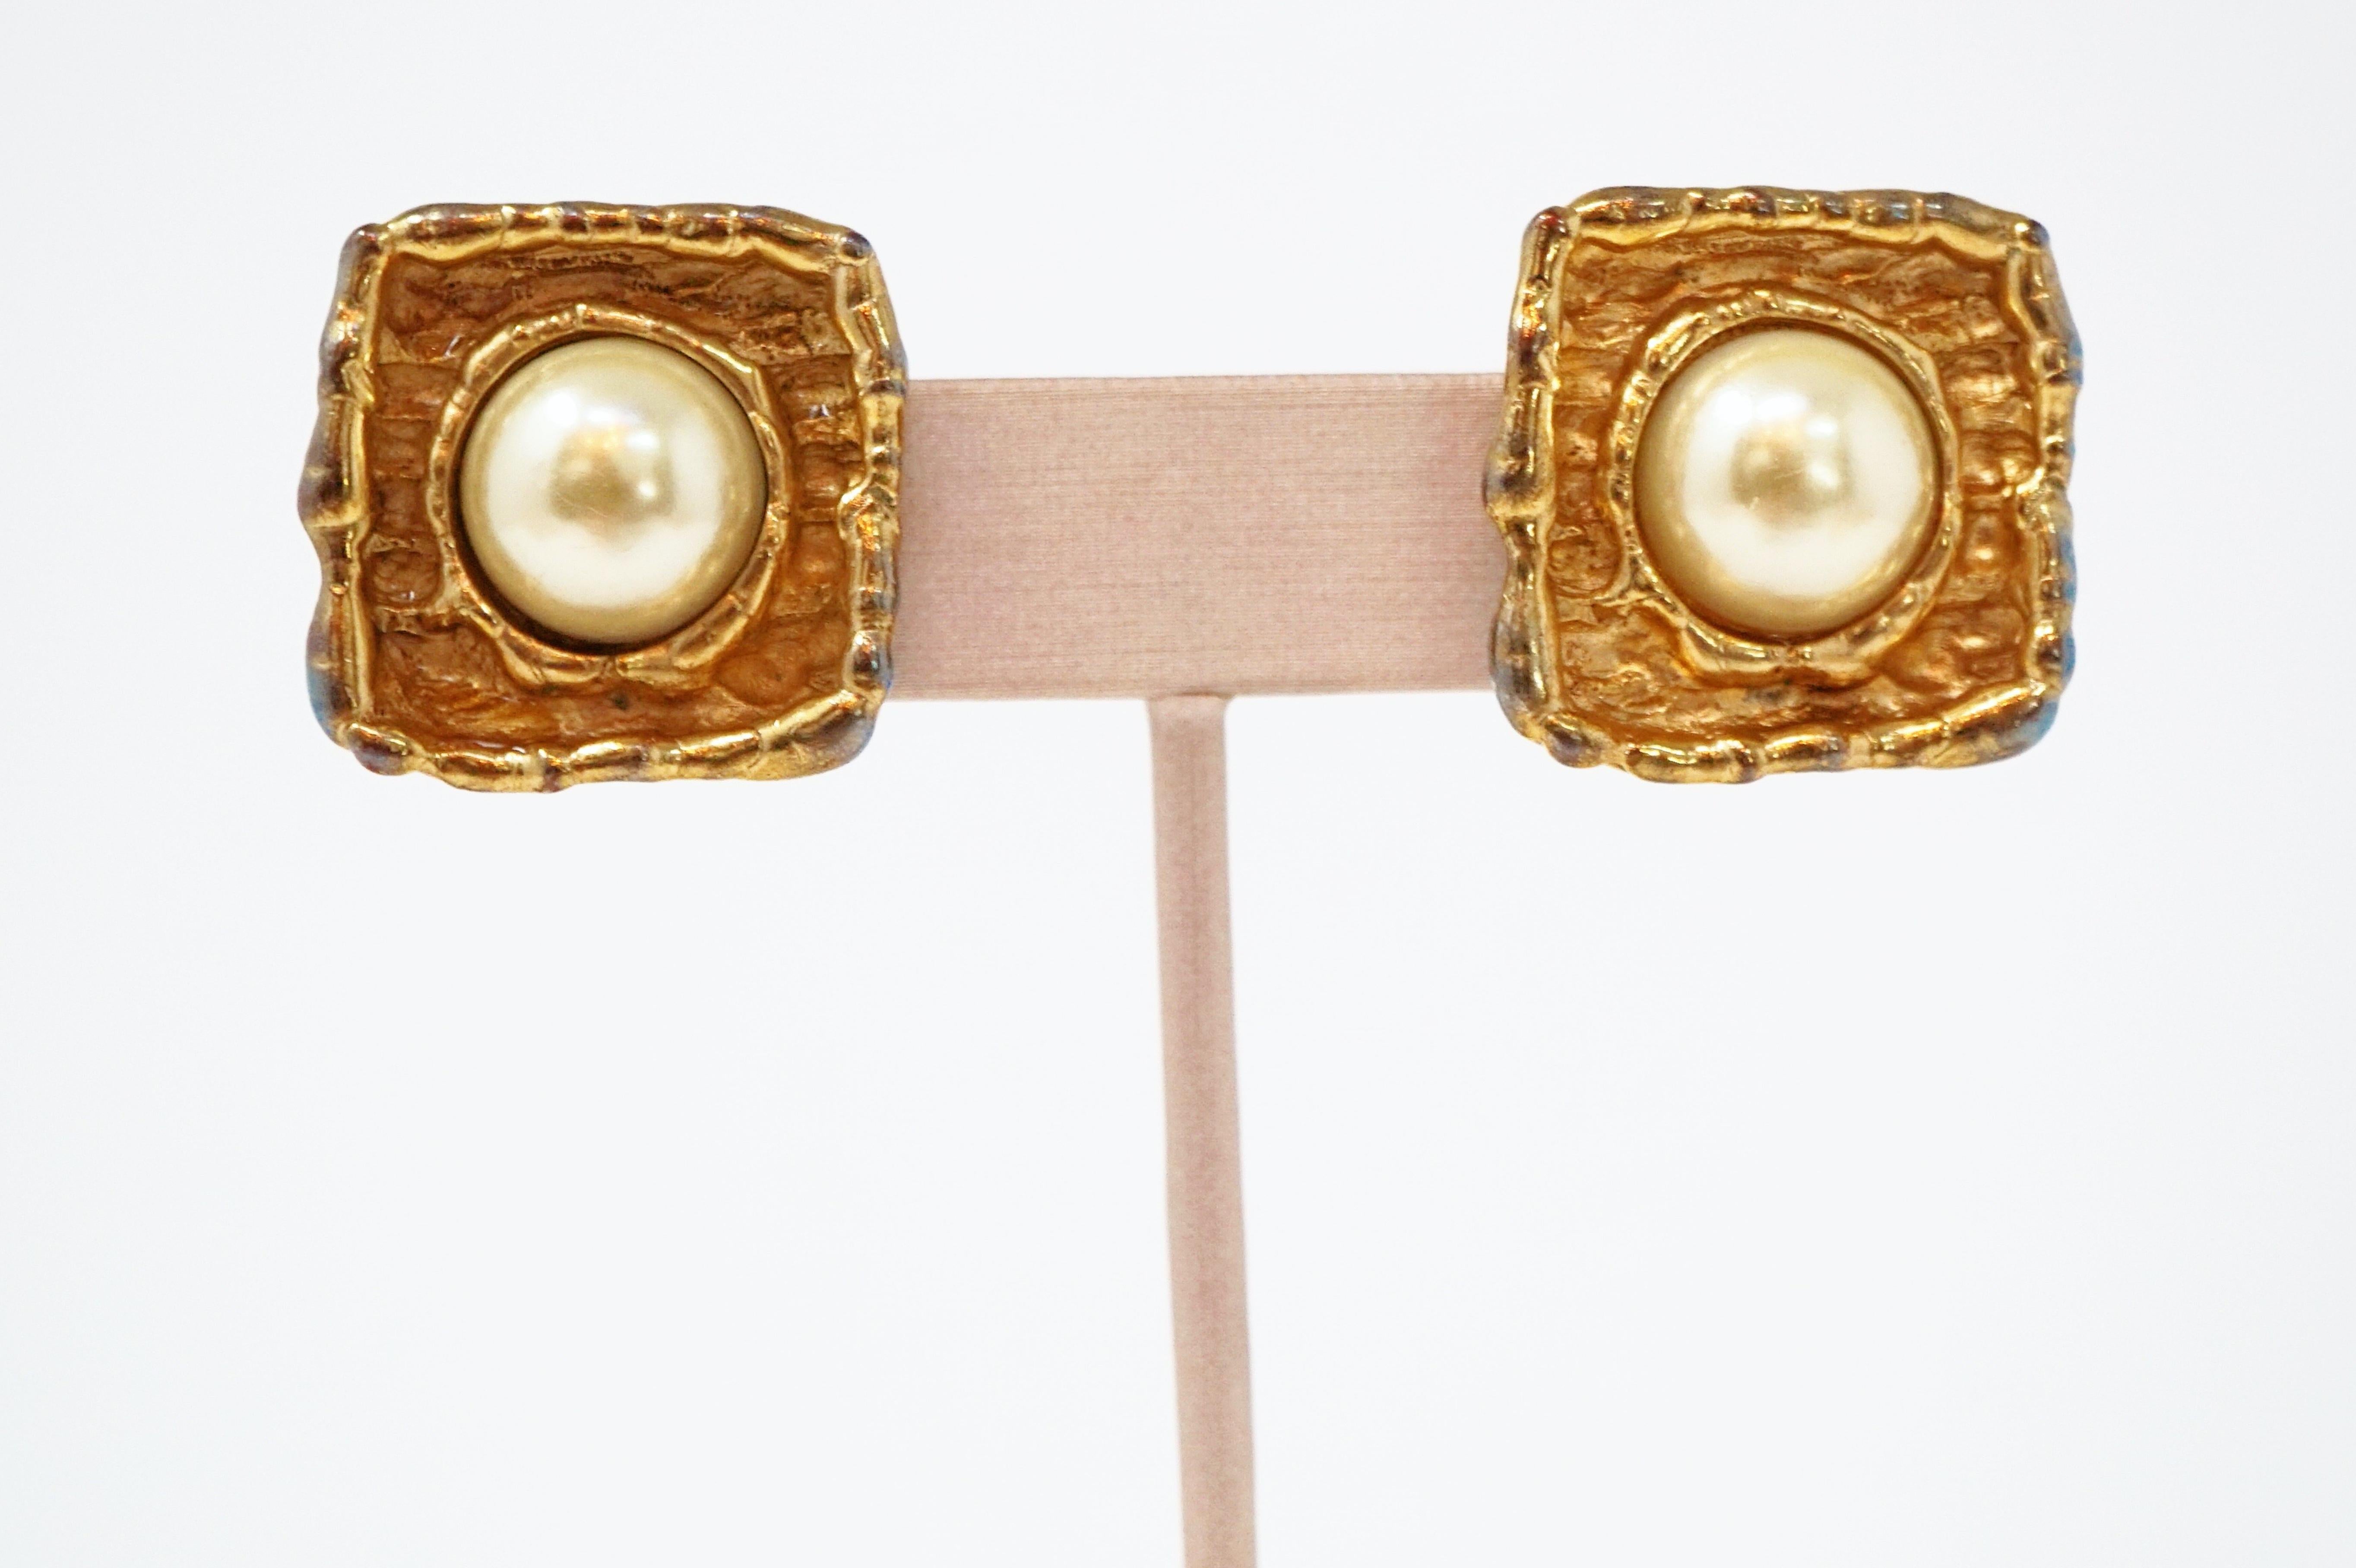 Women's Vintage Gilt & Faux Mabe Pearl Statement Earrings, In The Style of Chanel For Sale